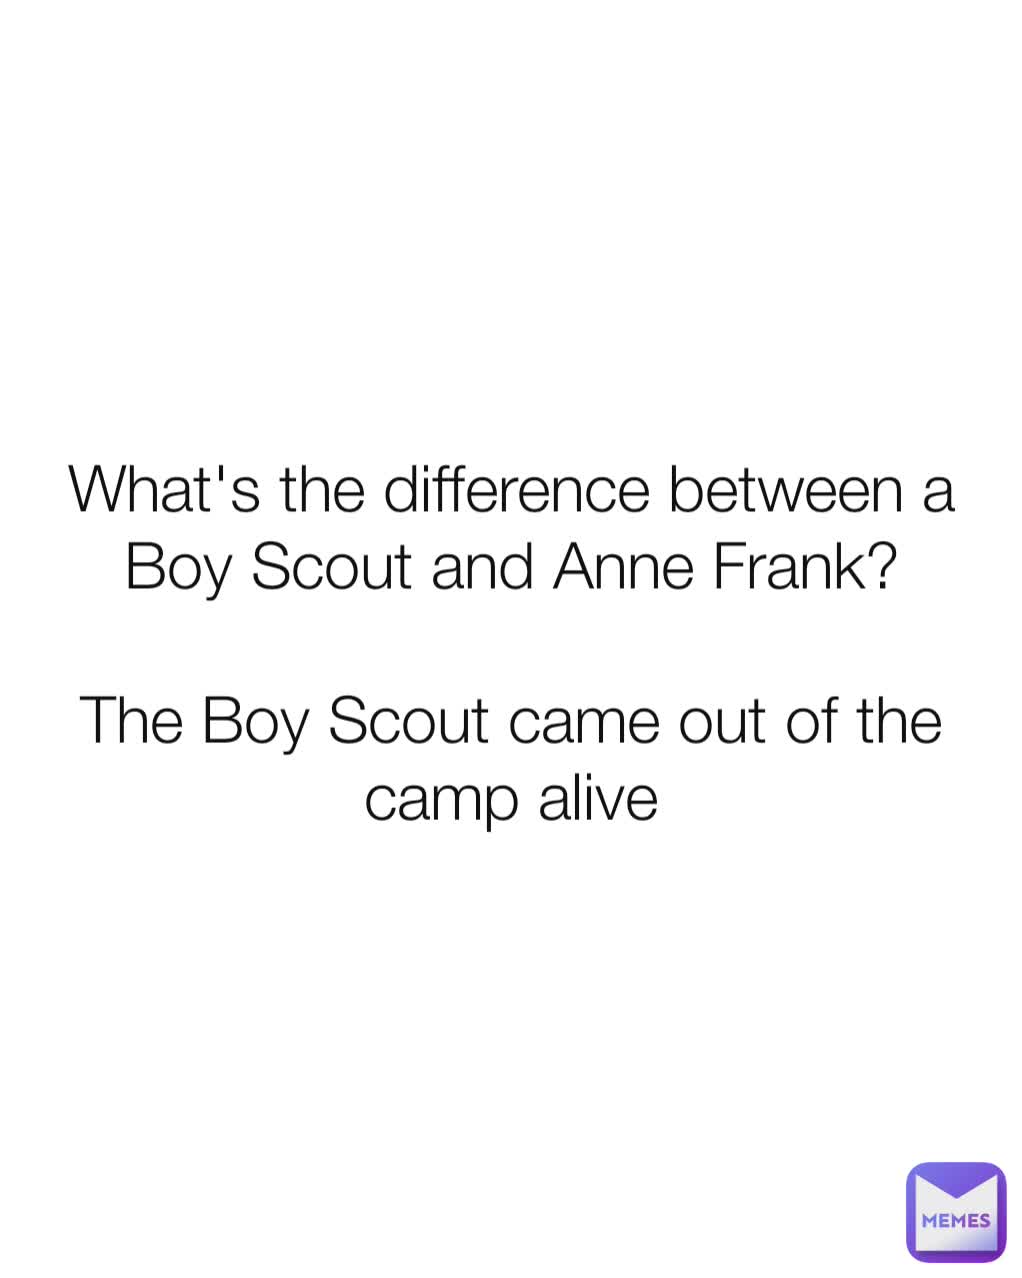 What's the difference between a Boy Scout and Anne Frank?

The Boy Scout came out of the camp alive